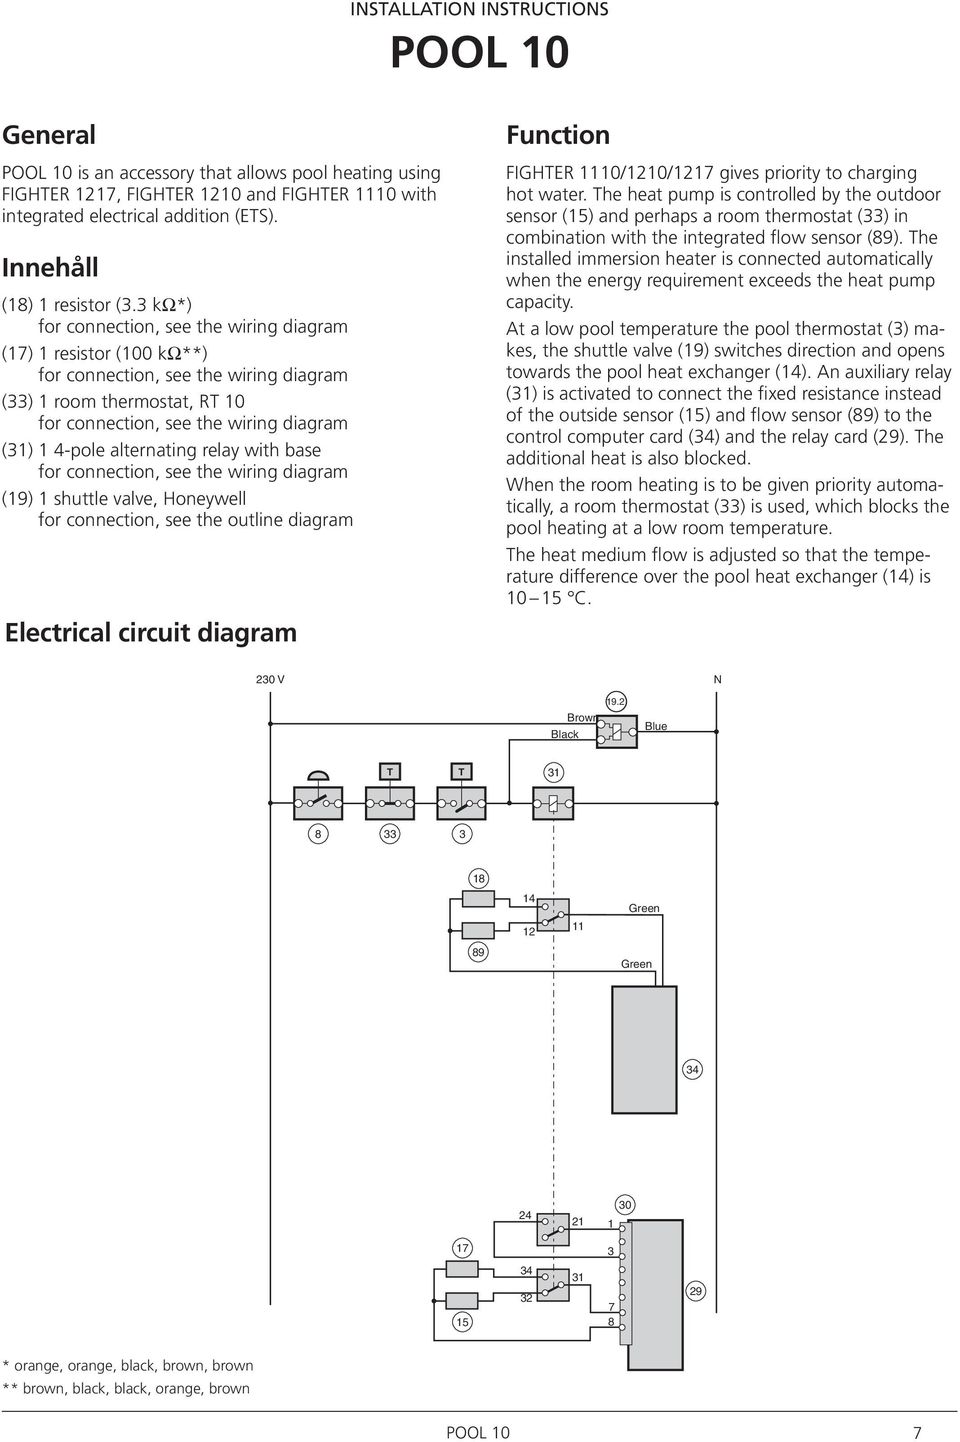 alternating relay with base for connection, see the wiring diagram (19) 1 shuttle valve, Honeywell for connection, see the outline diagram Electrical circuit diagram Function FIGHTER 1110/1210/1217